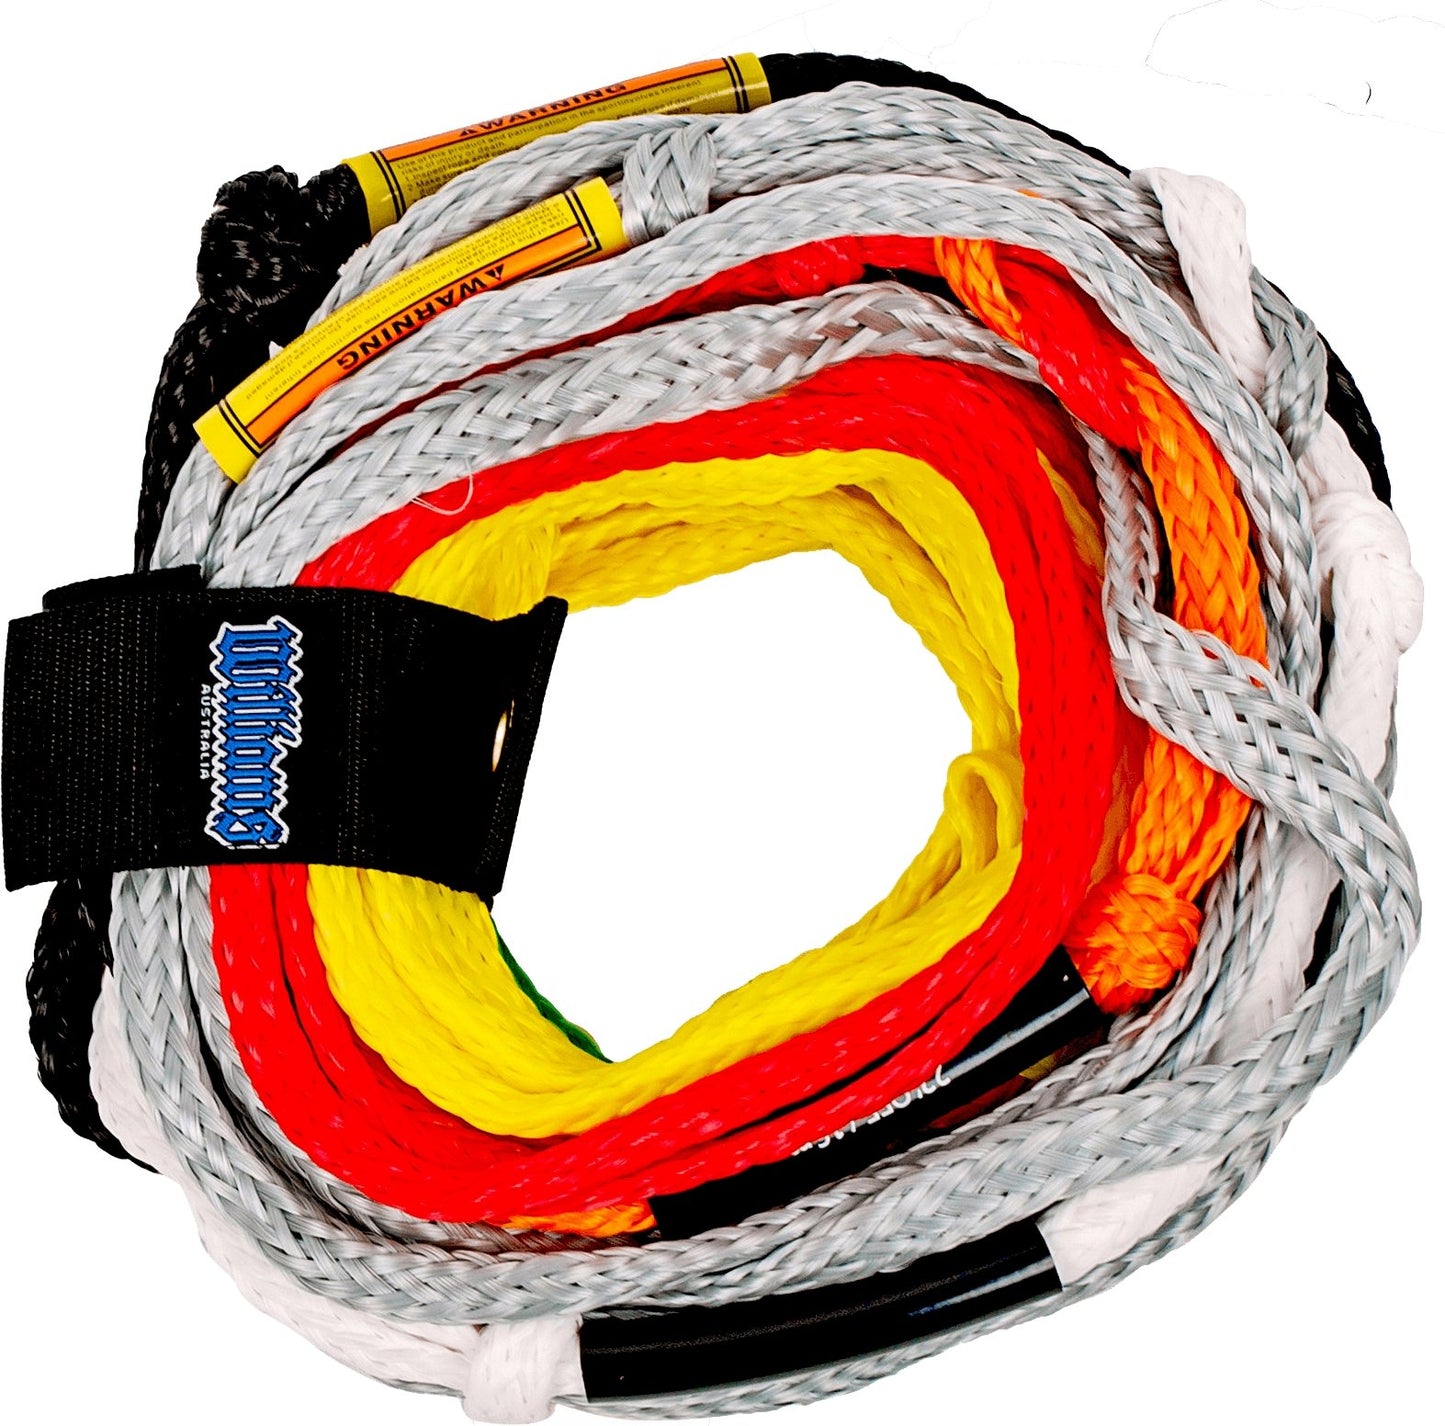 21.5M 8 Loop Rope Only - 80 Strand - Tournament Ready -Williams205601--